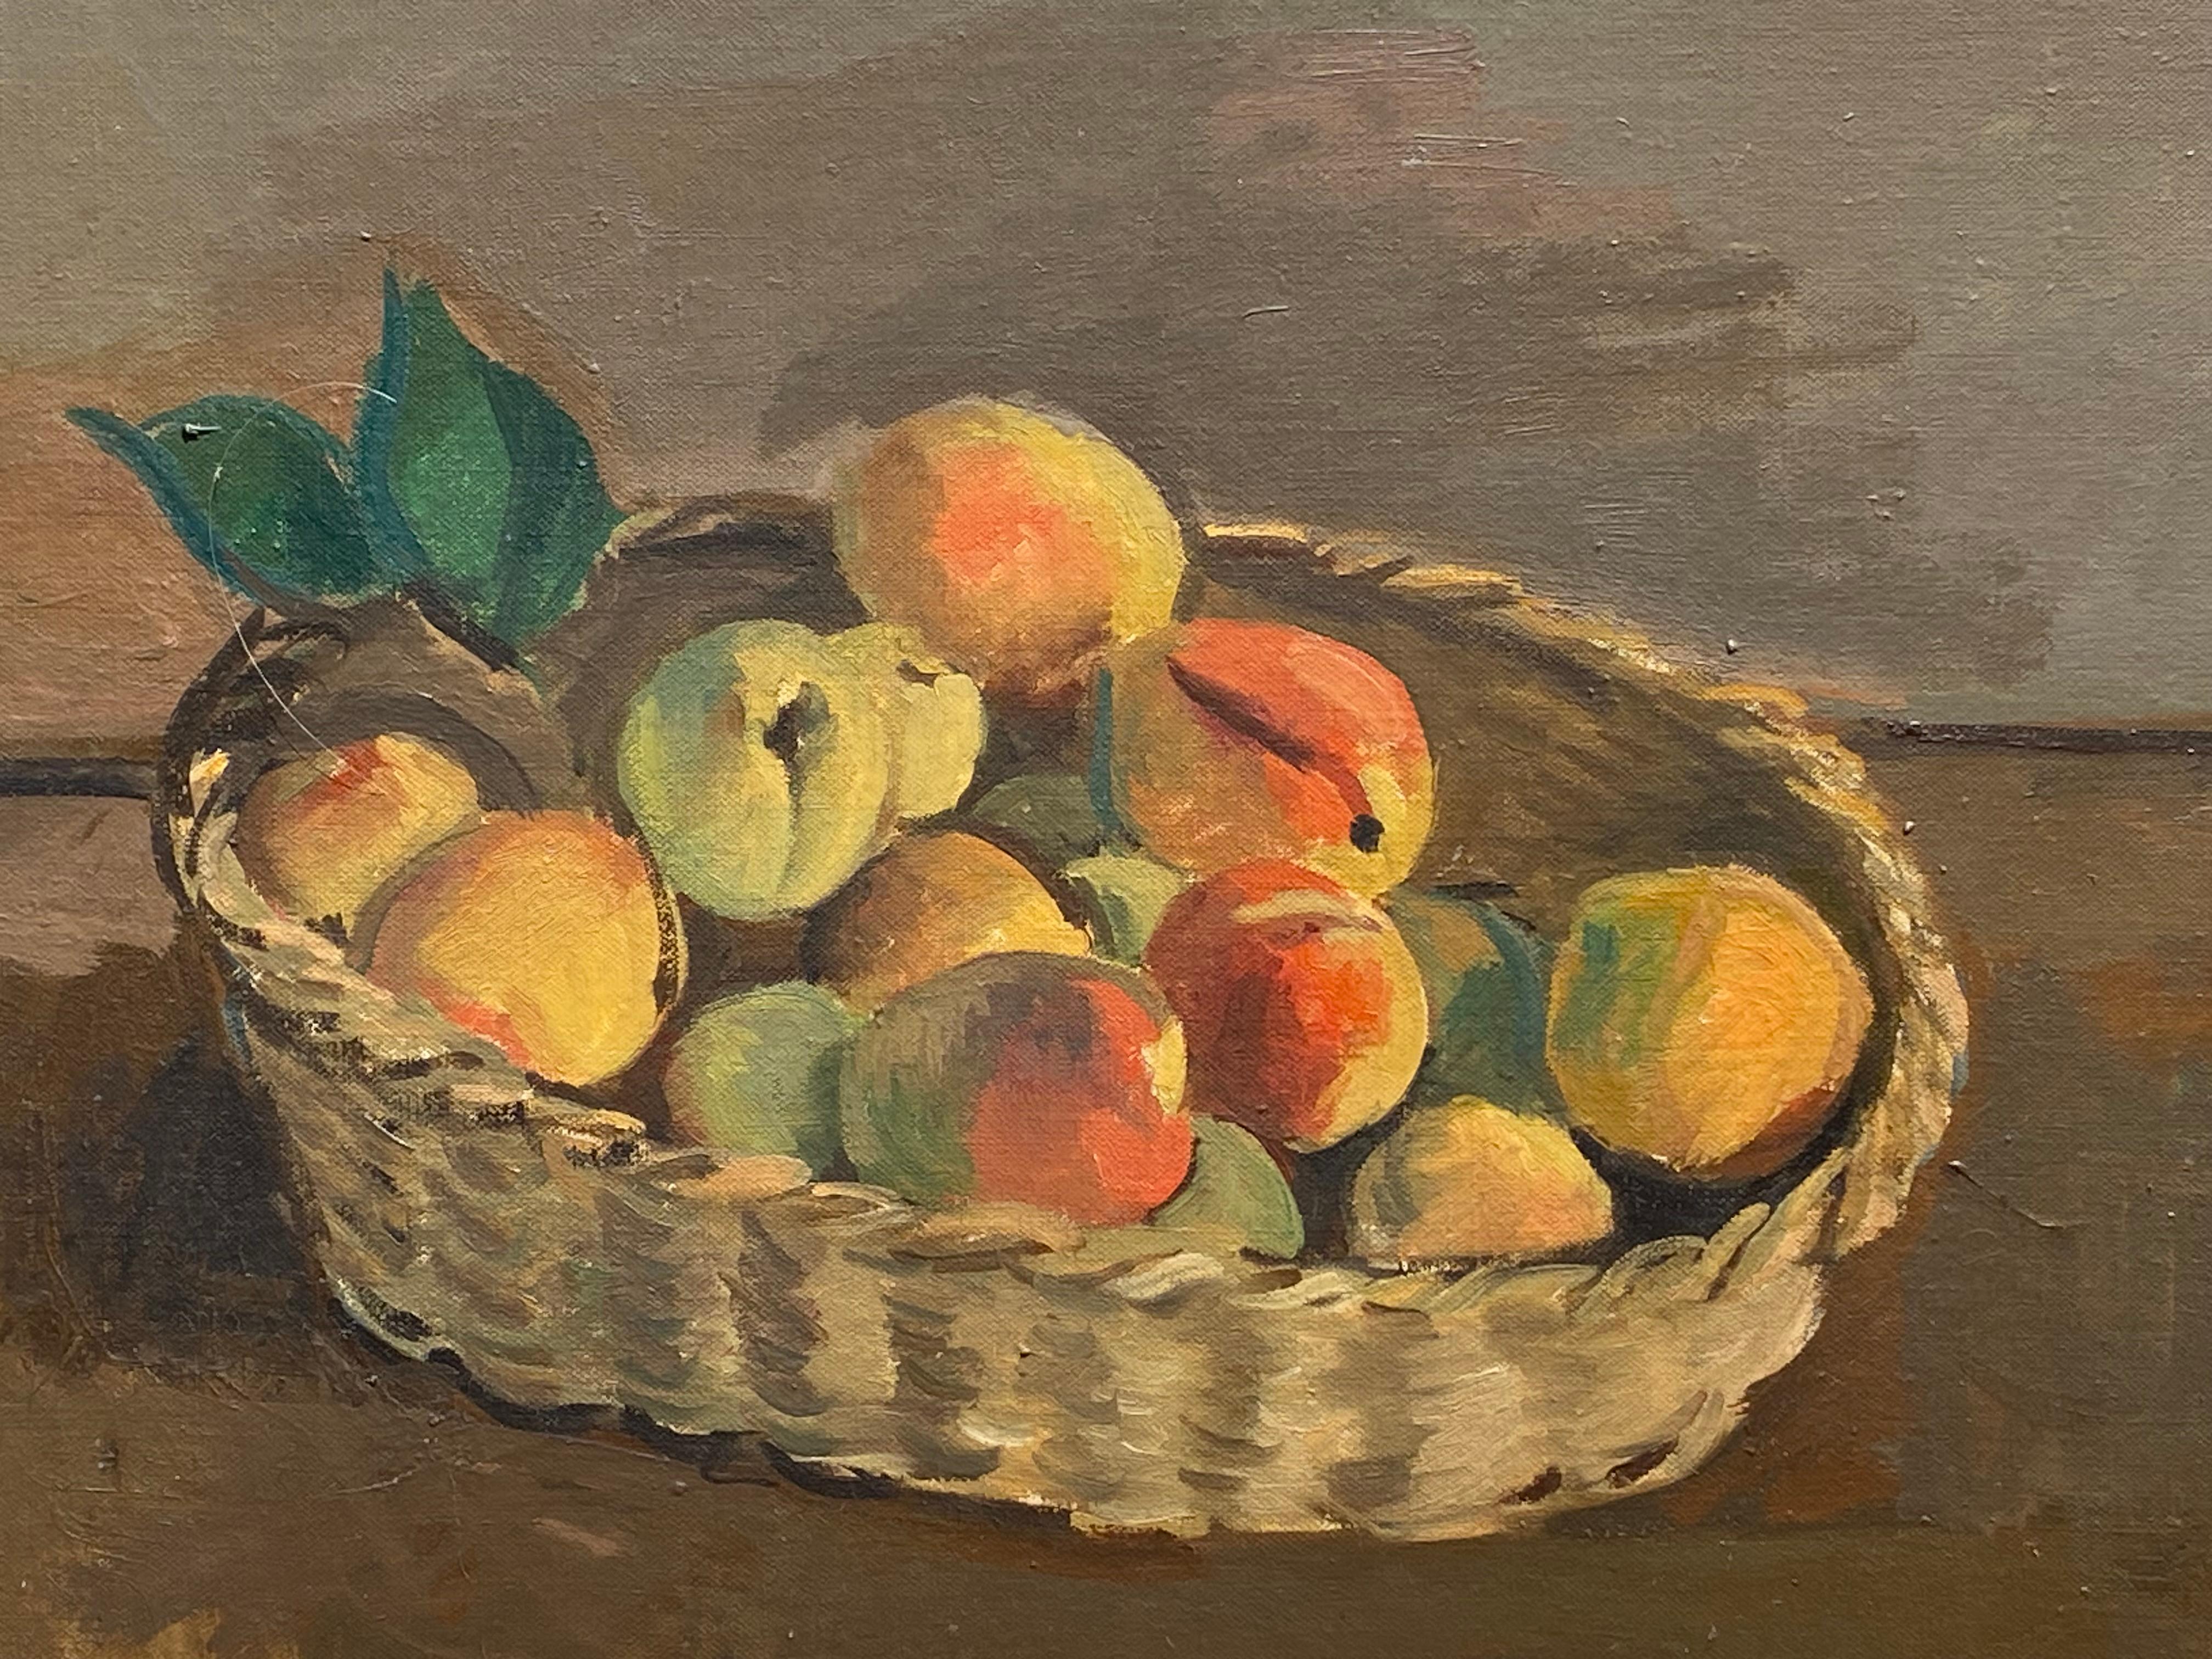 Beautiful oil on canvas still life painting of fruit in a wicker basket by Nicolai Cikovsky.  Signed lower right. Condition is very good. Circa 1945.  The painting is housed in a contemporary gold leaf gallery frame. Overall measurements are 24.25